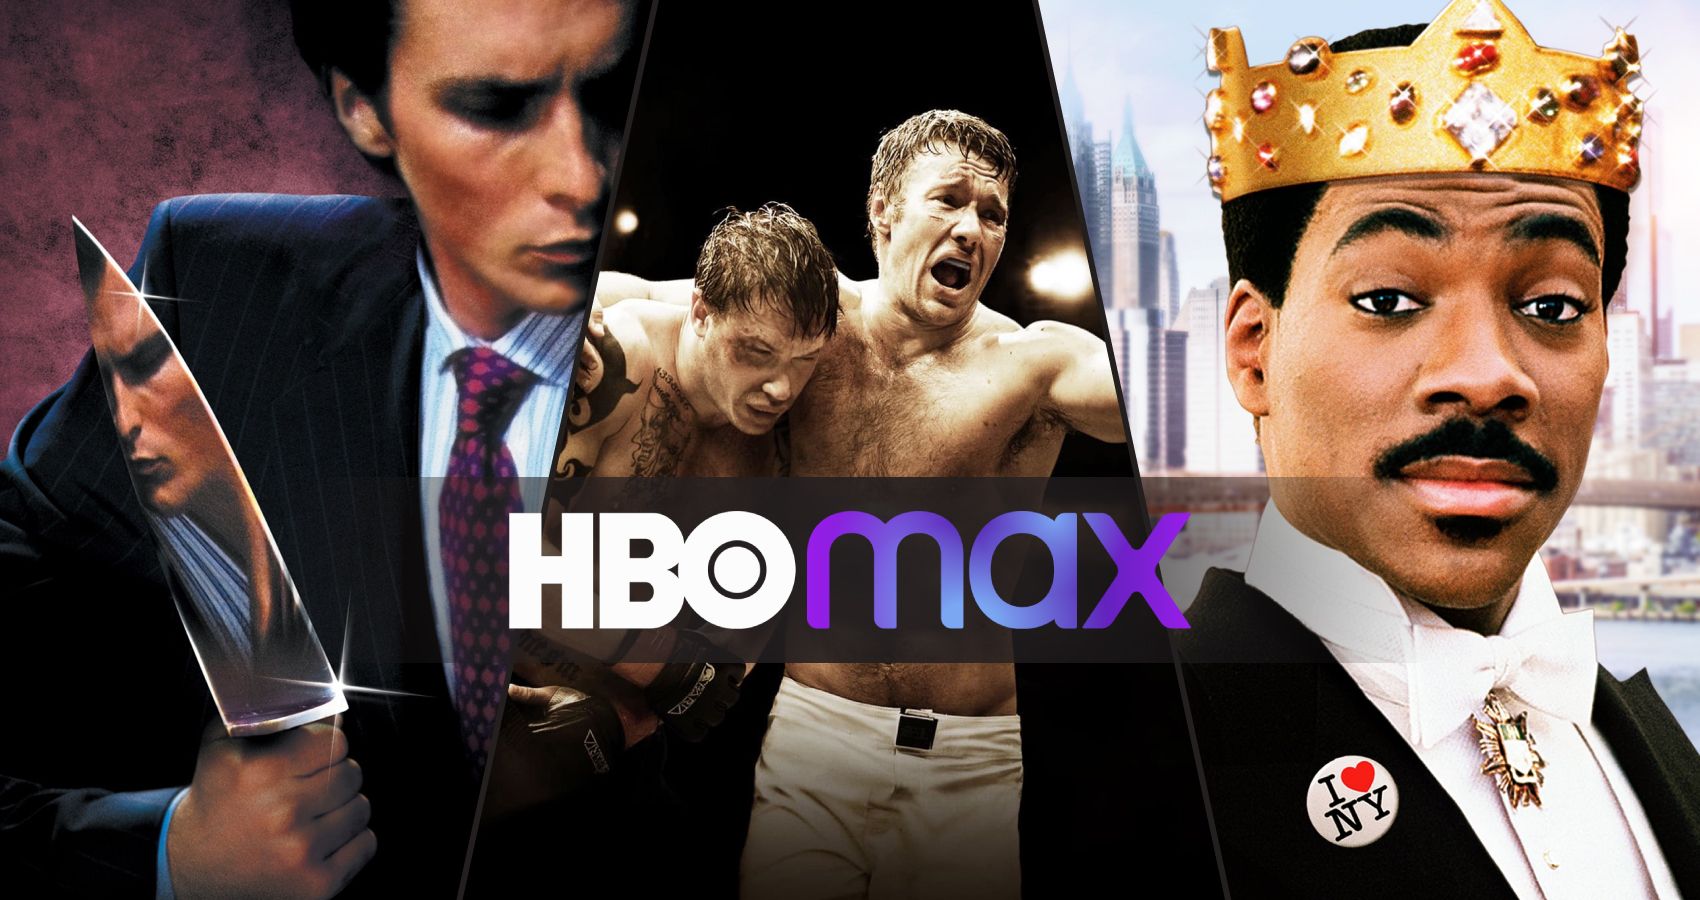 Romantic Movies on HBO Max to Watch in February 2021